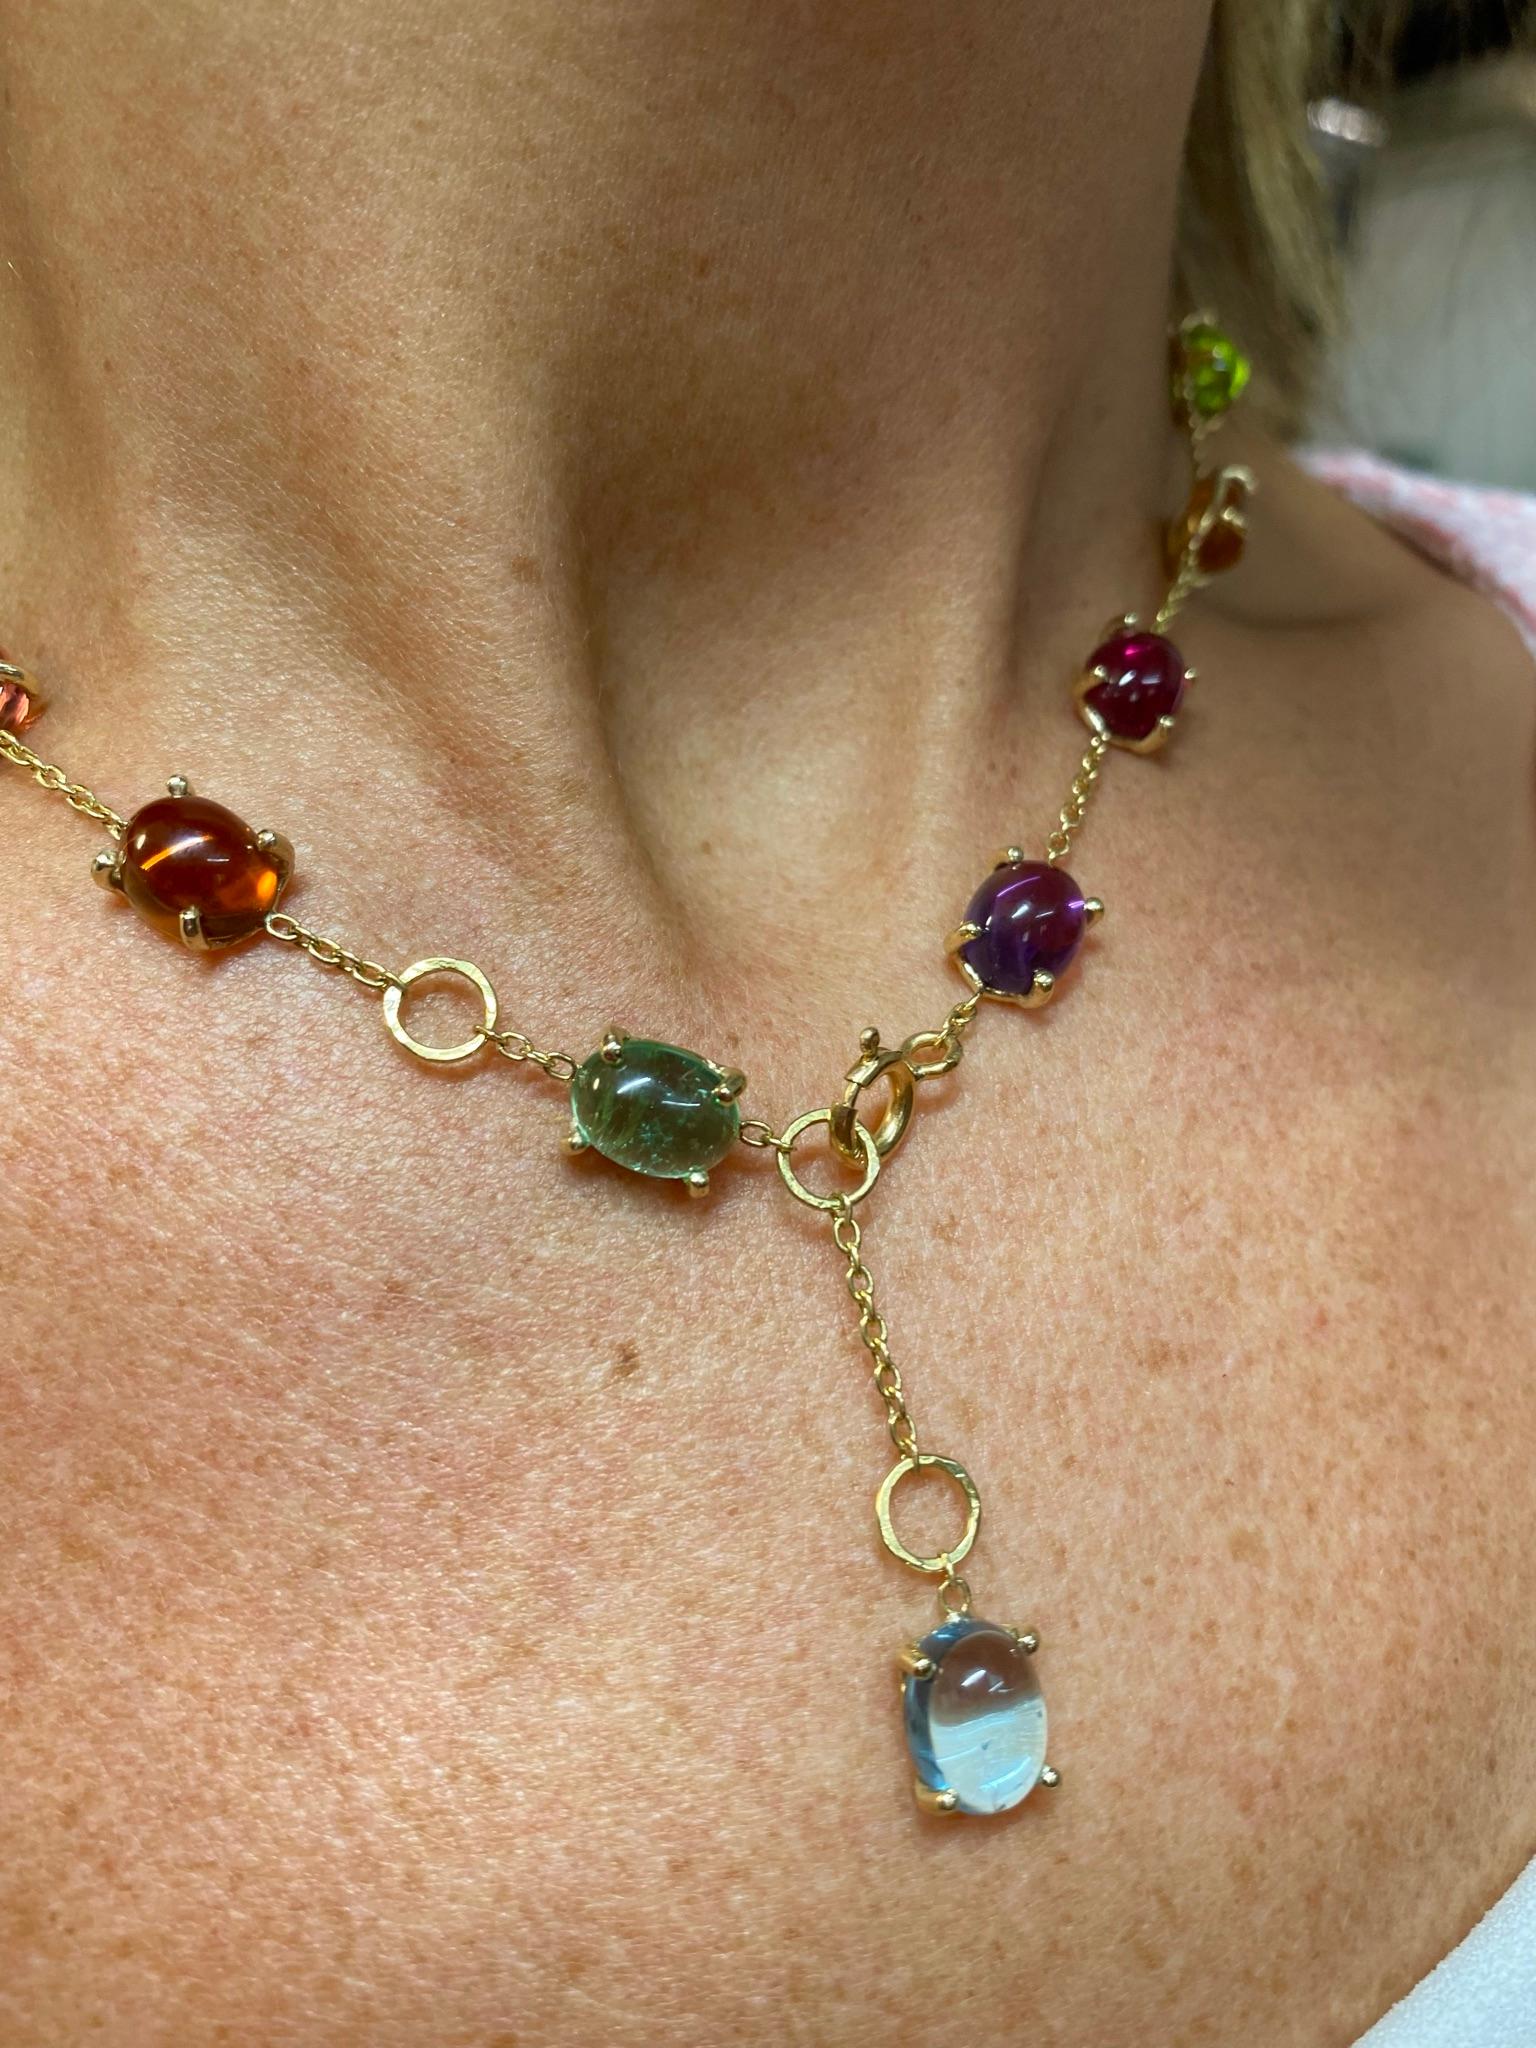 Rossella Ugolini Design Collection, 18 Karat Yellow Gold Feisty Necklace Oval cut Amethyst Garnet Citrine Peridot Tourmaline
A feisty necklace colored stones made of one line of the 18 Karat yellow gold chain embellished with 18 th stones: Peridot,